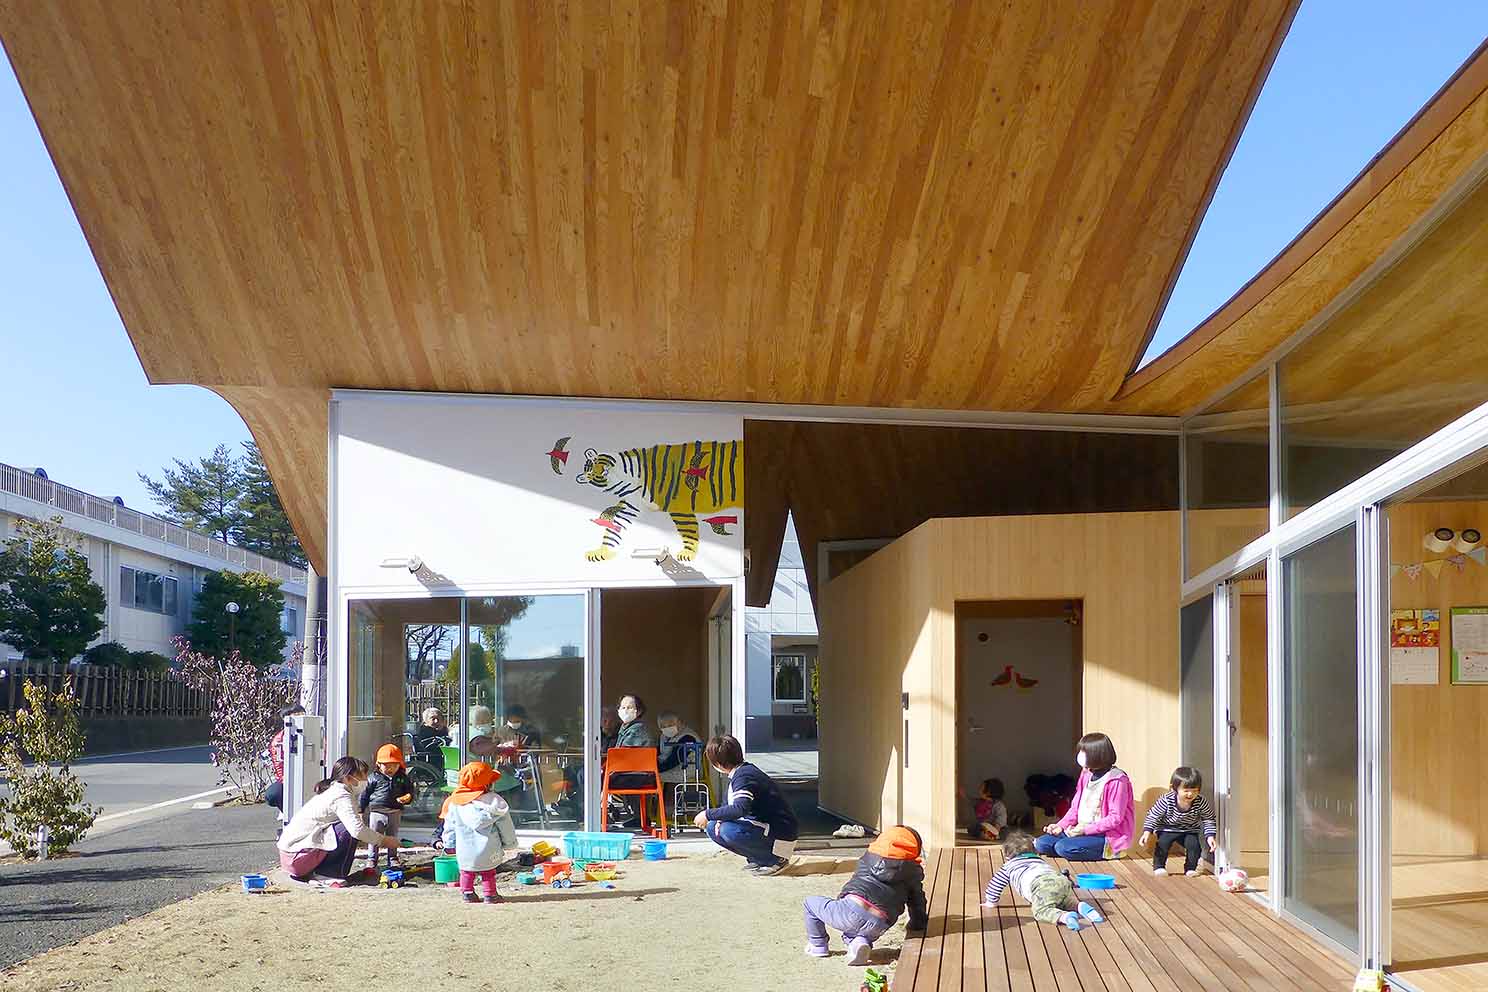 Toranoko Nursery: A Multi-Generational Hub for Young and Old